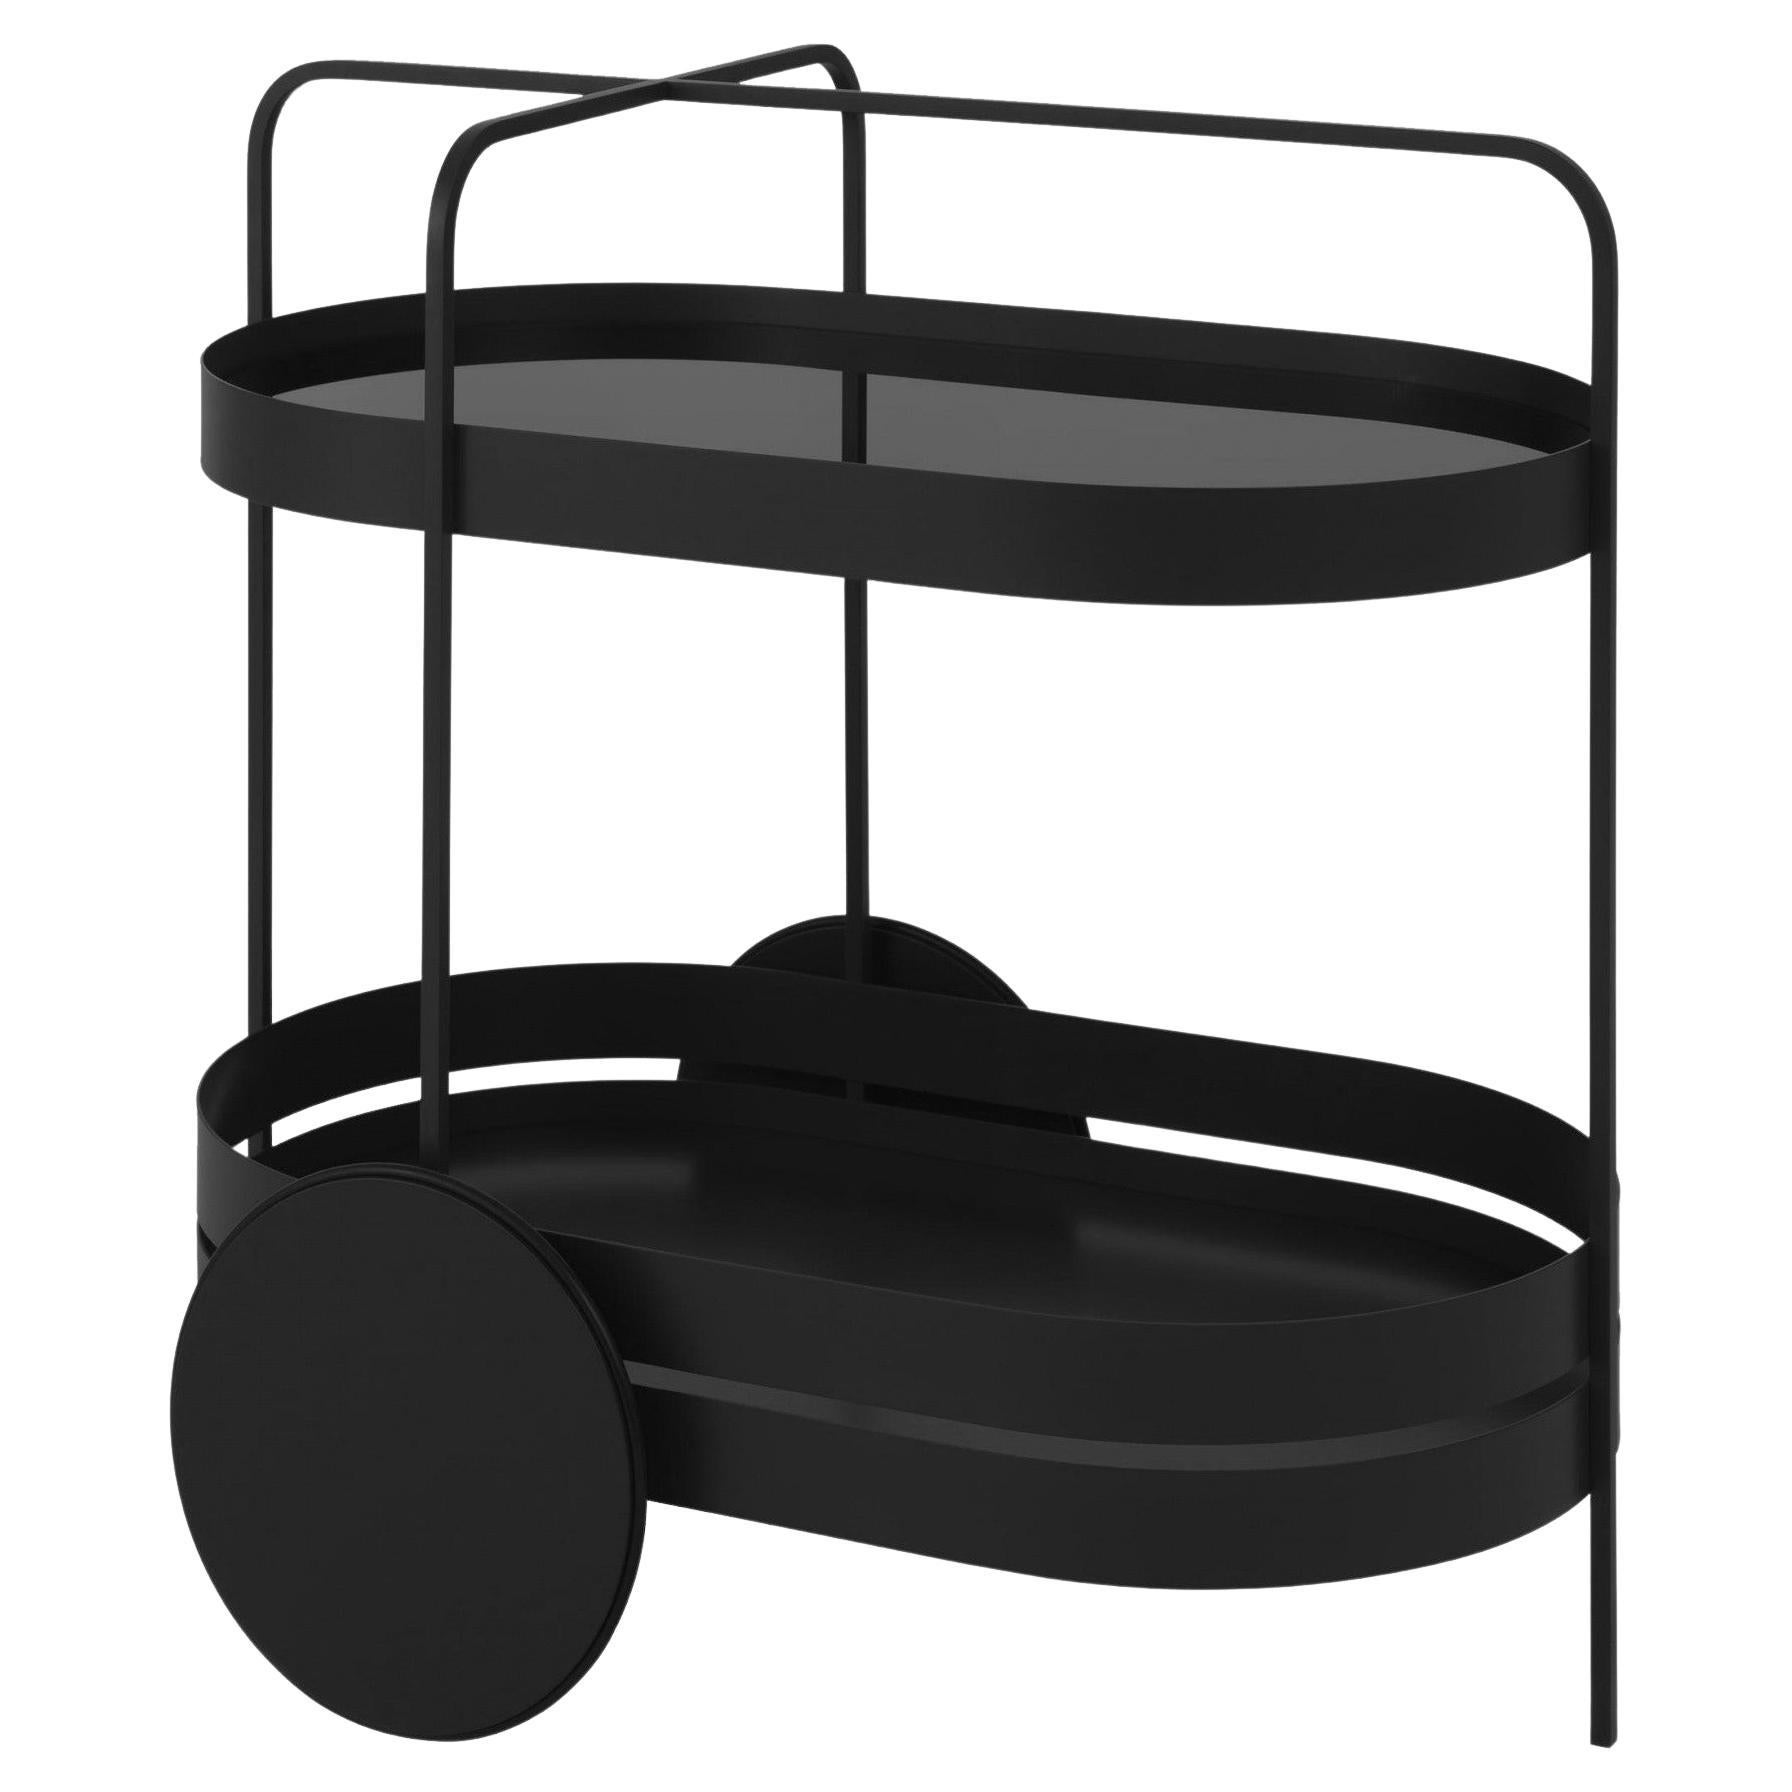 A future Classic. The clear lines and stylish practicality of the GRACE serving trolley make for a winning combination. Its Minimalist form is the perfect modern twist on a Classic item. Use as a mobile bar or side table, or for storage in home